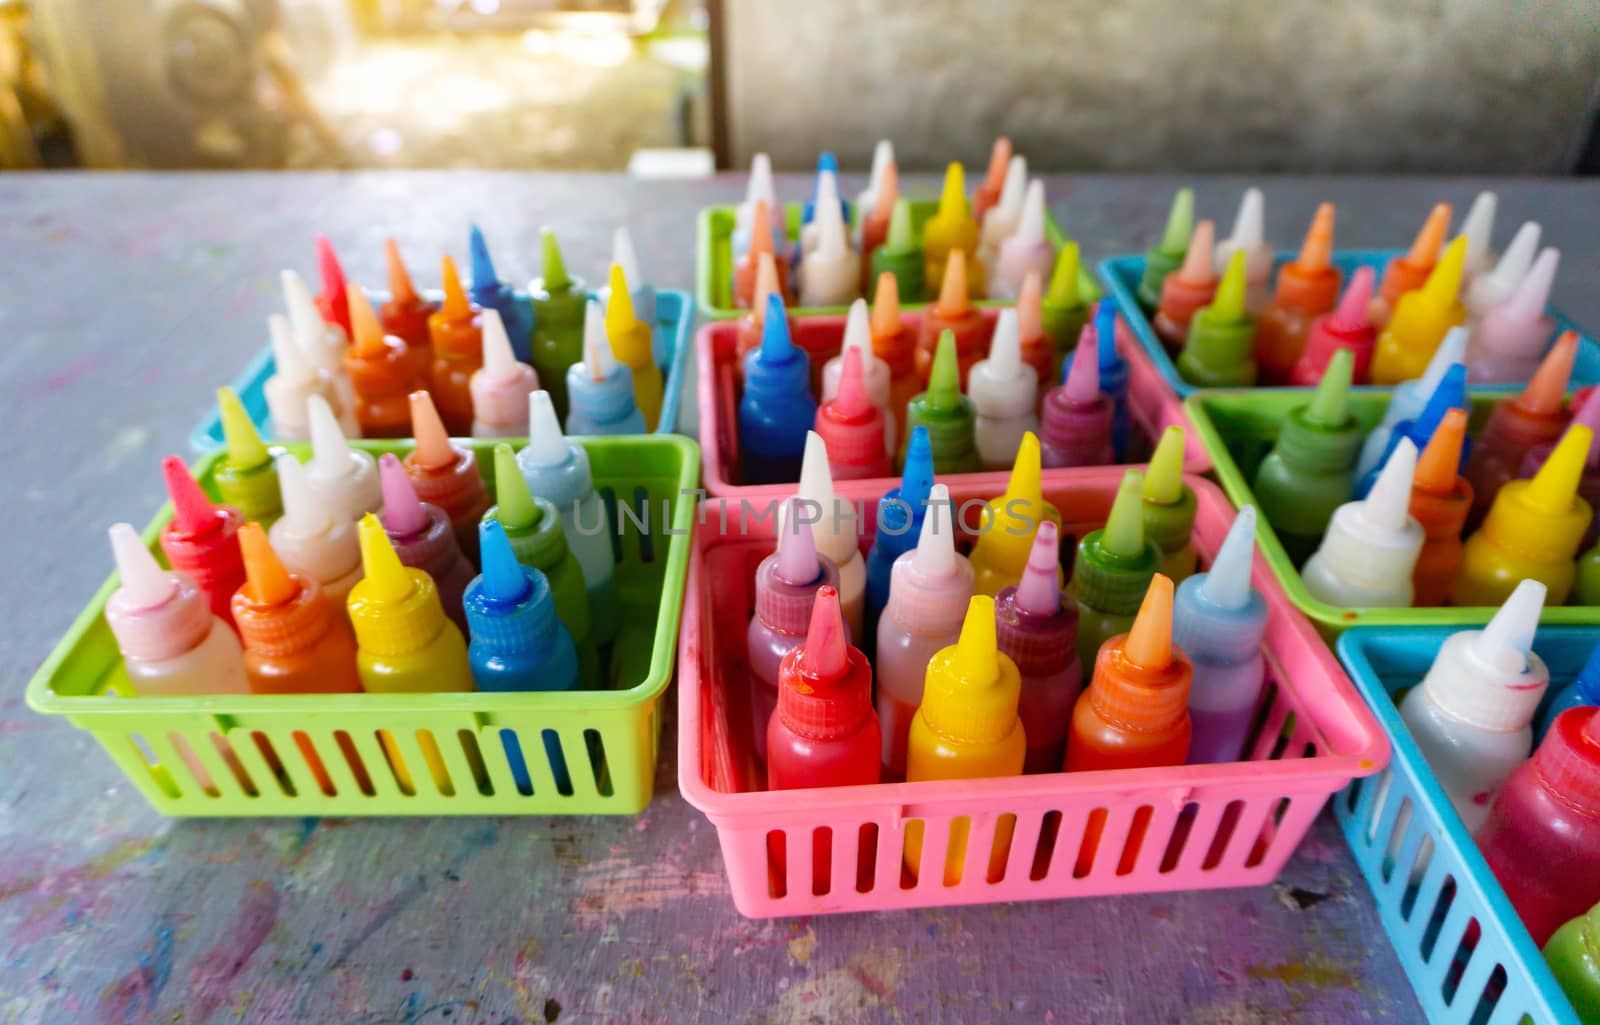 Colorful plastic colors for children To play and draw pictures.